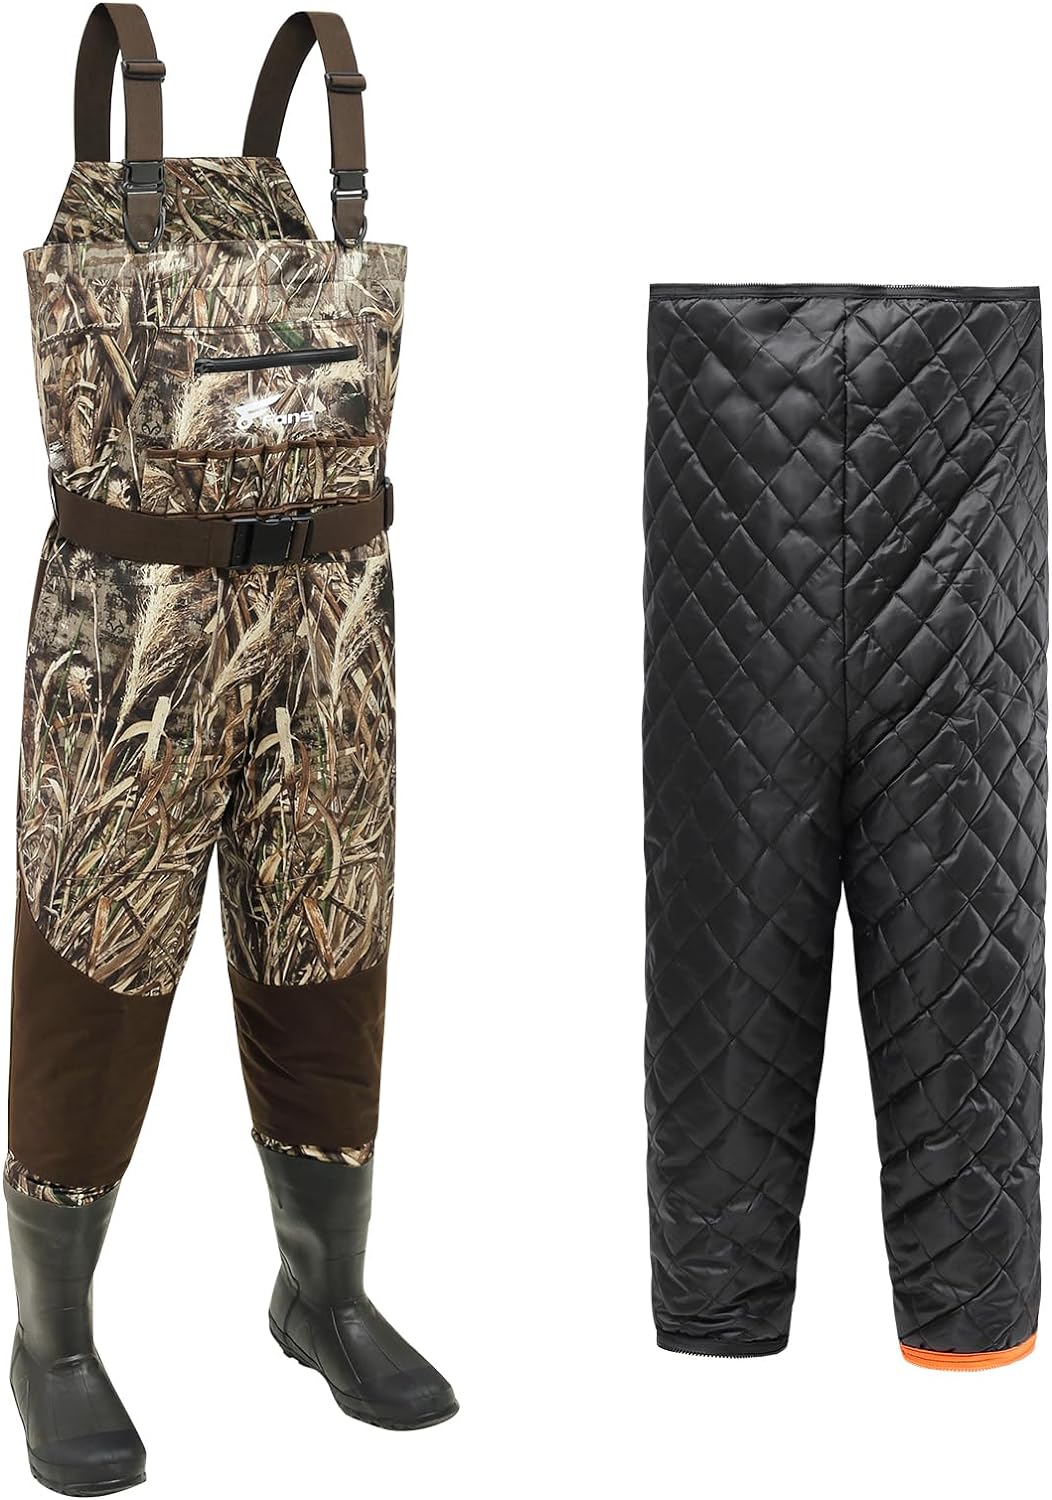 8 Fans Breathable Hunting Waders,1000G Insulation Boots with Removable Insulated Liner for Duck Hunting (Realtree Max5, 7-14)